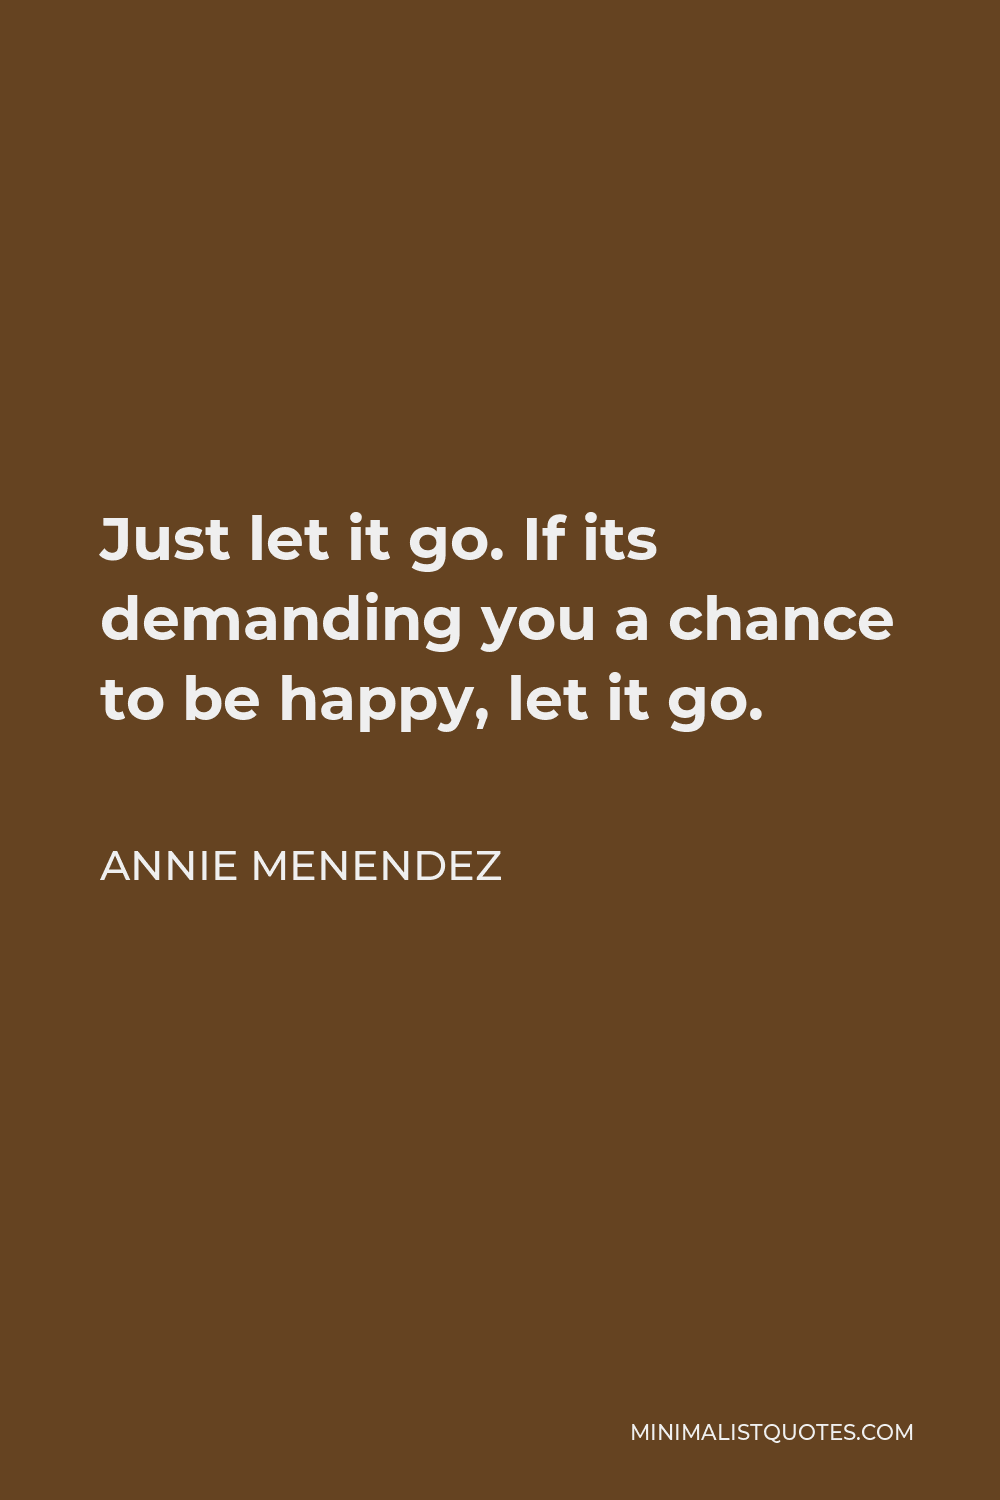 Annie Menendez Quote - Just let it go. If its demanding you a chance to be happy, let it go.